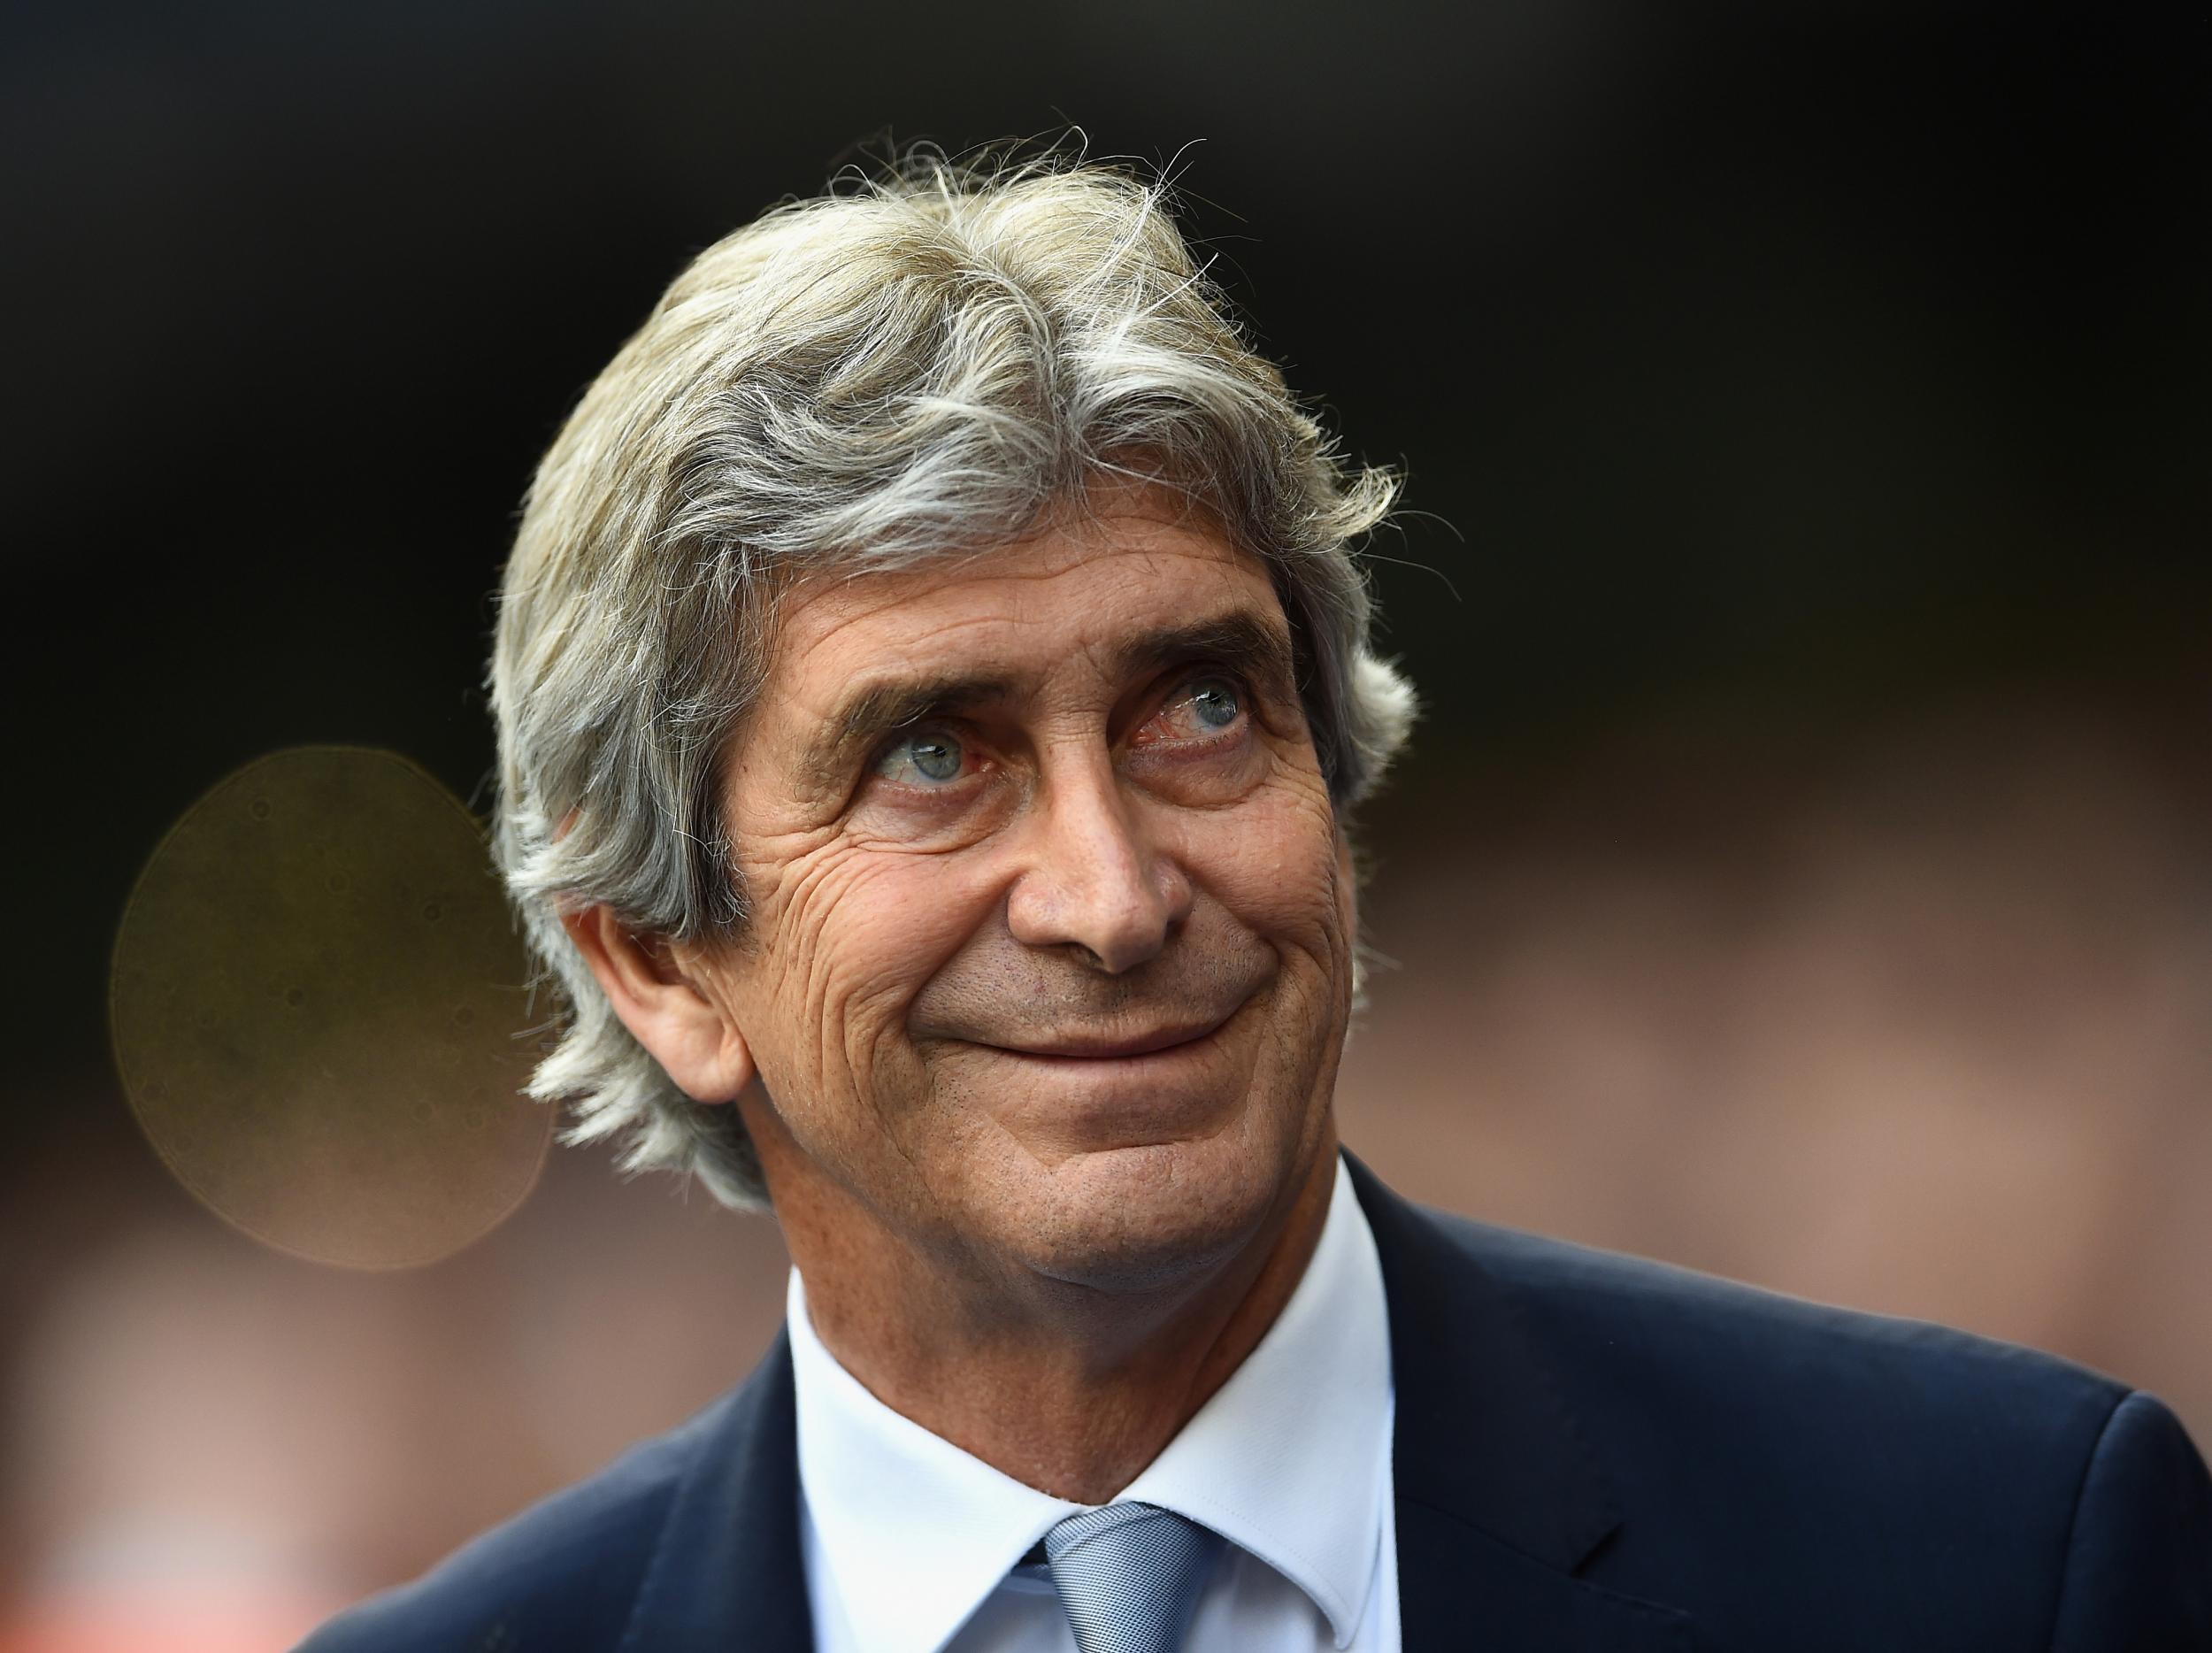 Pellegrini is currently the manager of Hebei China Fortune